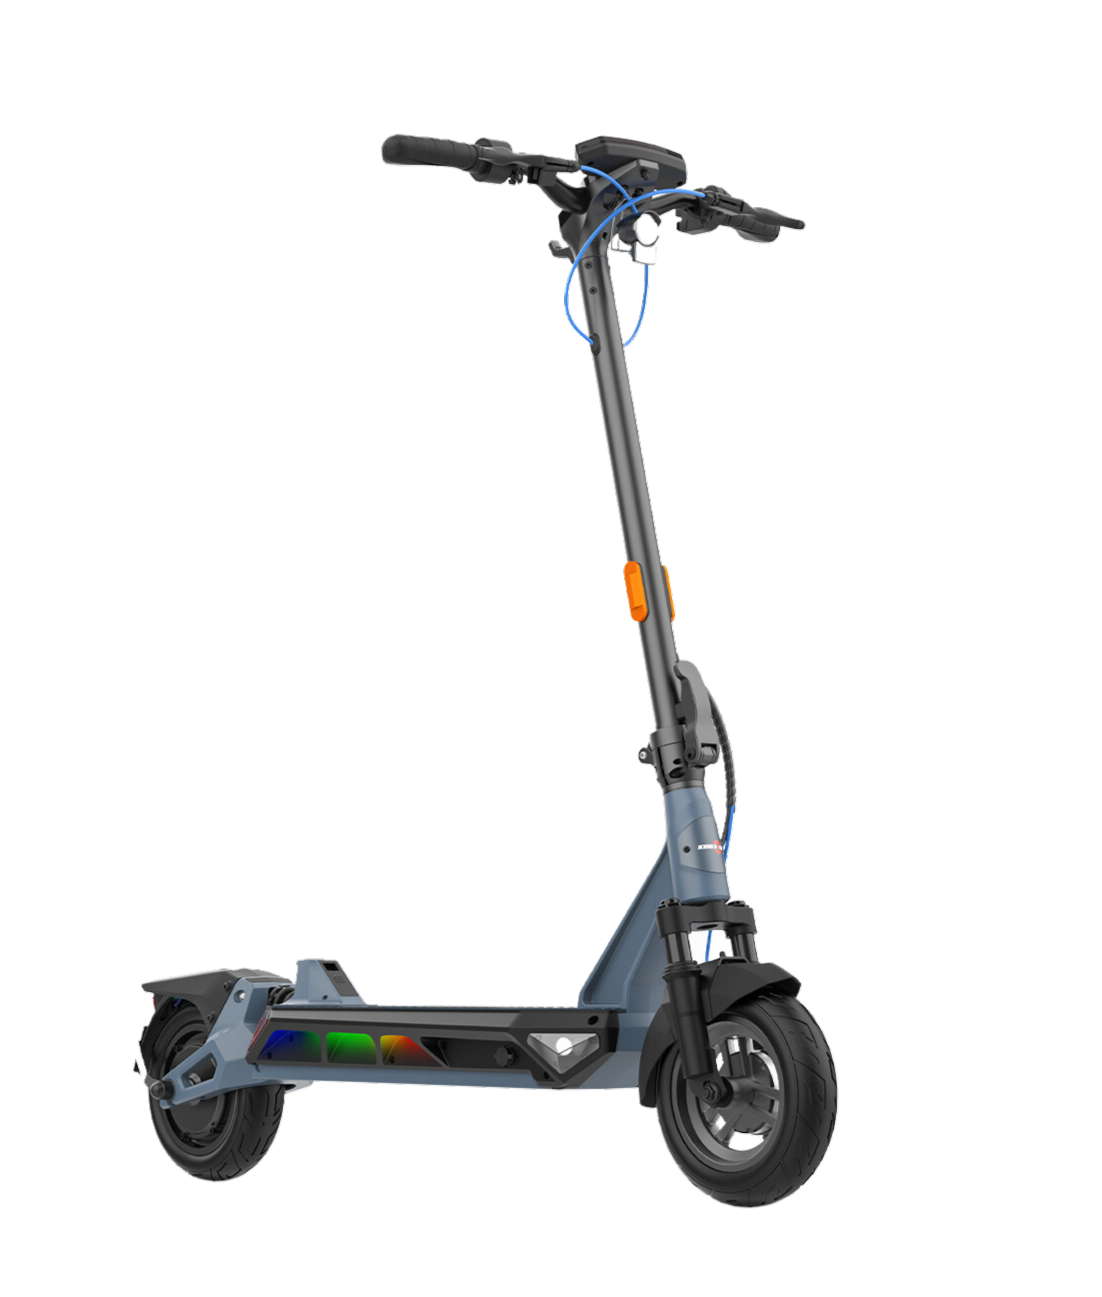 KingSong N12 Pro Electric Scooter (Demo unit available for test rides)